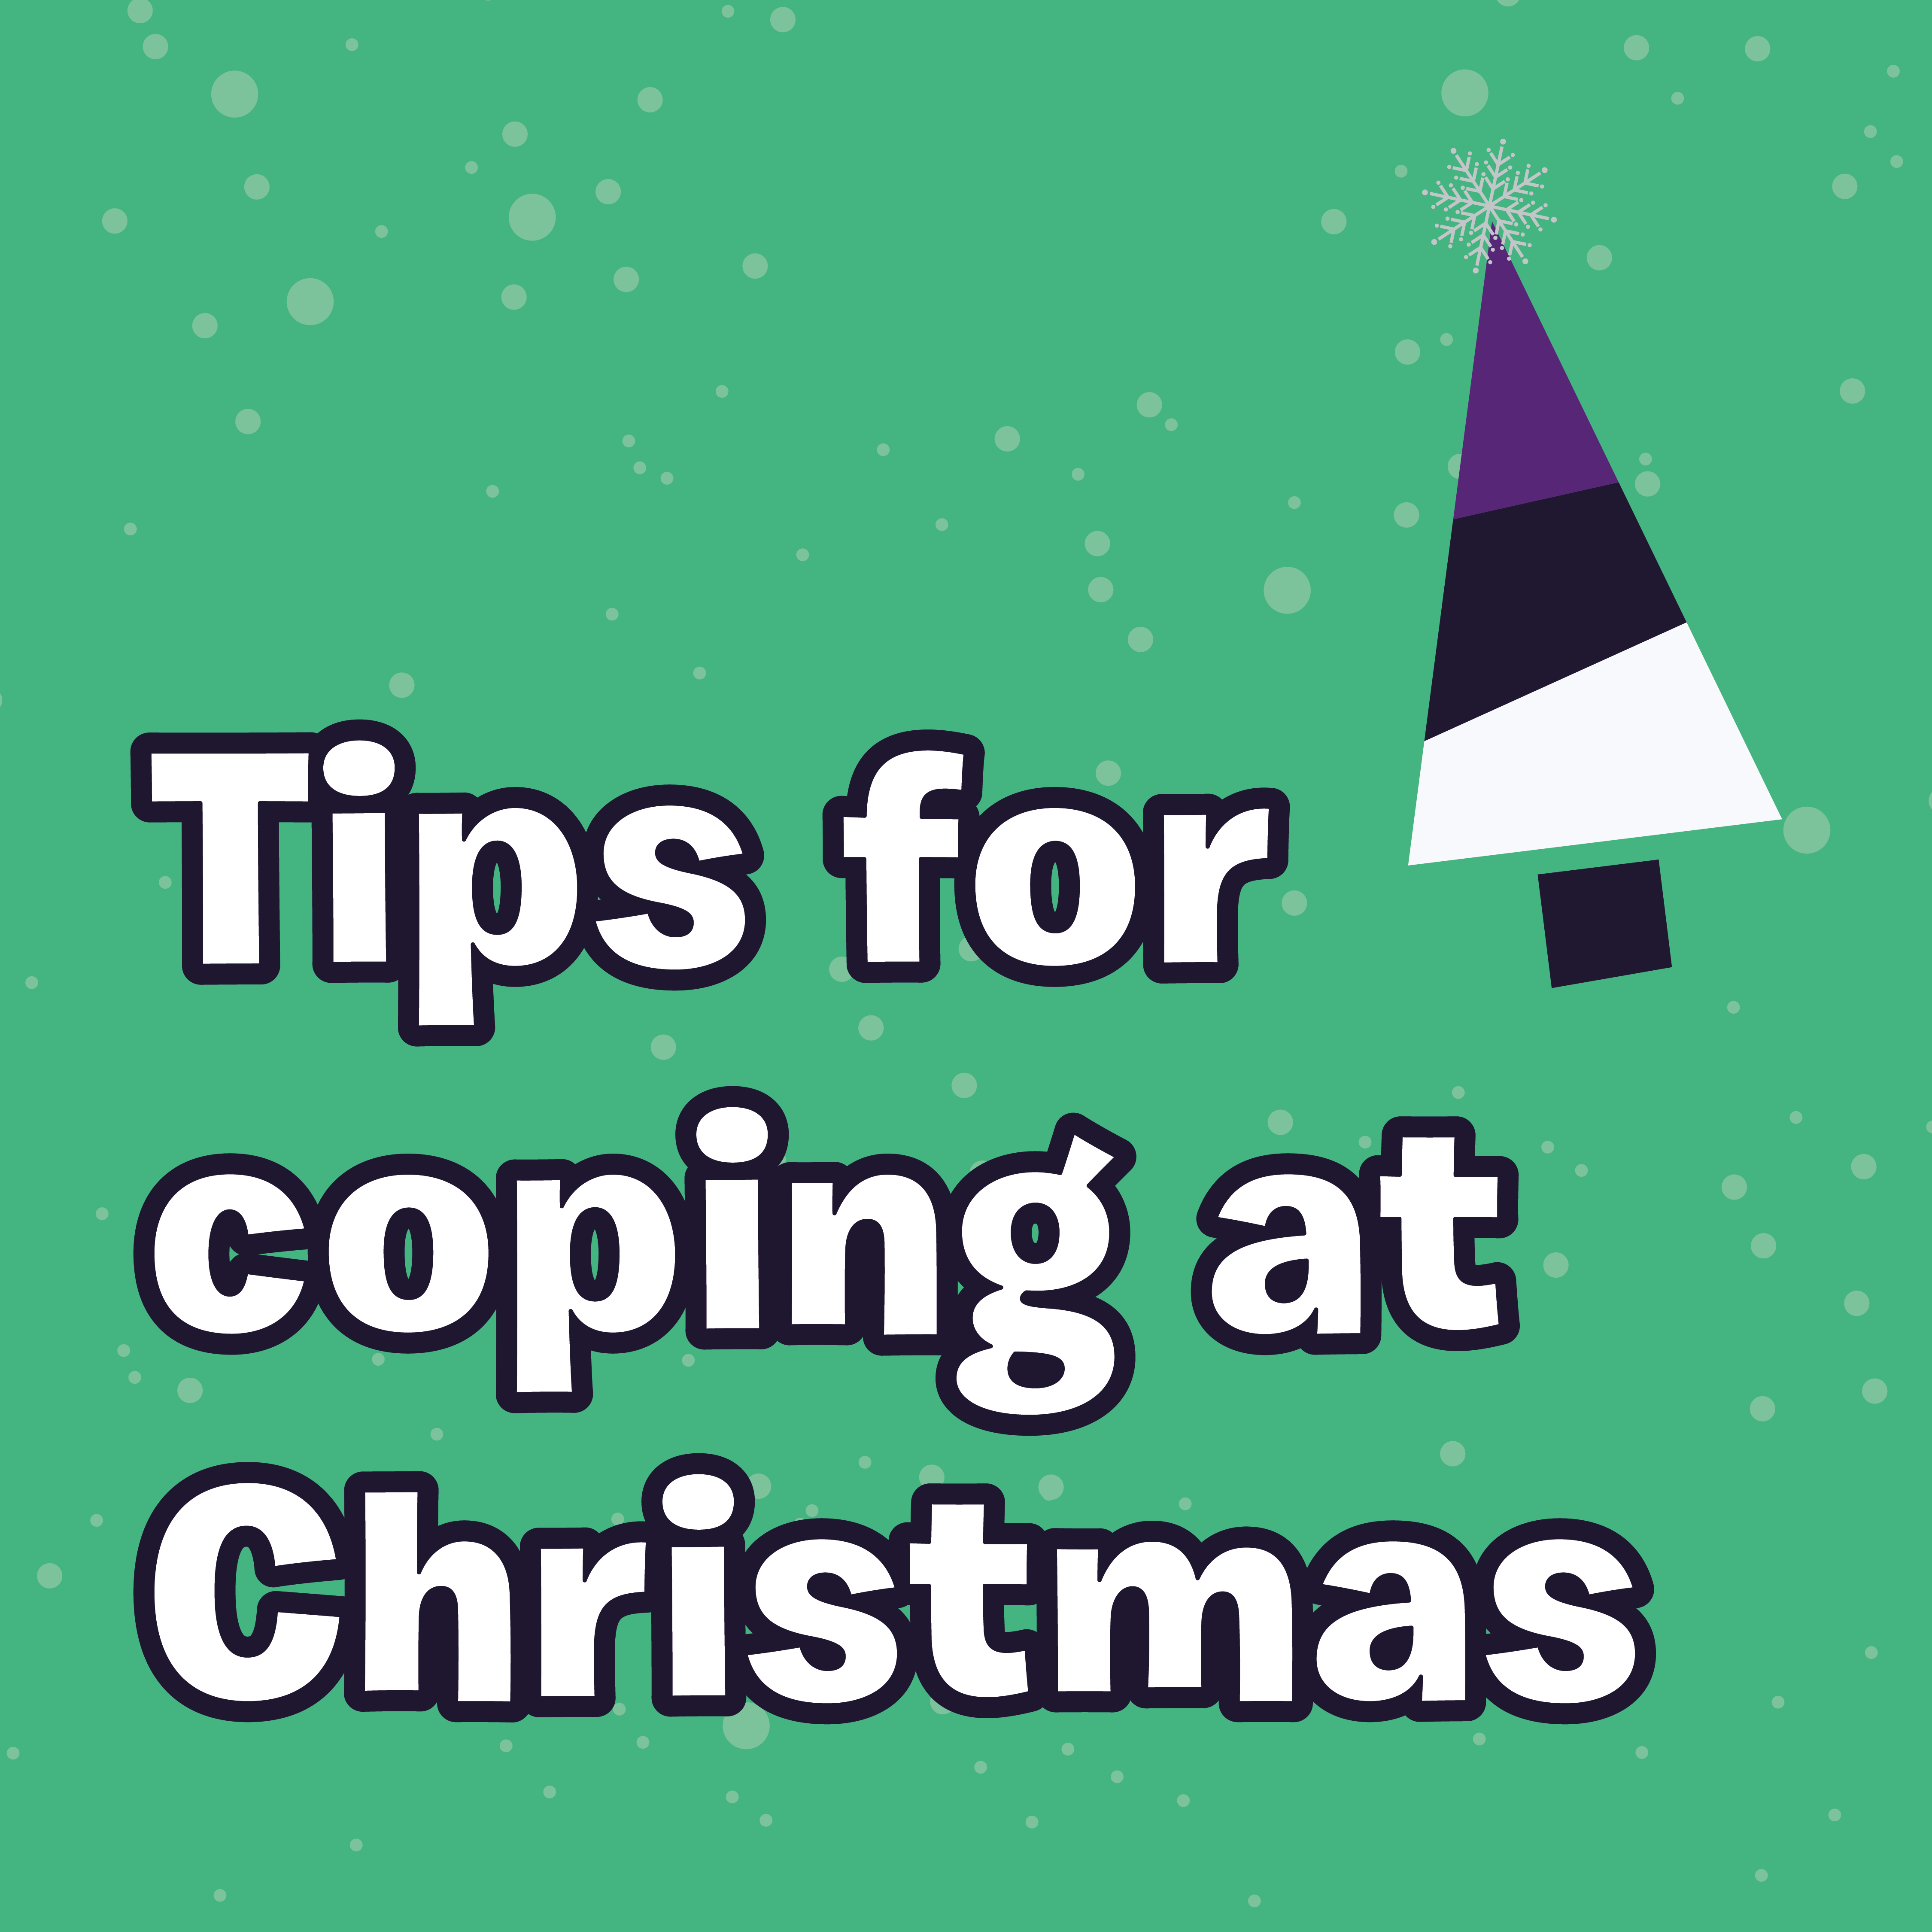 Tips for Coping at Christmas